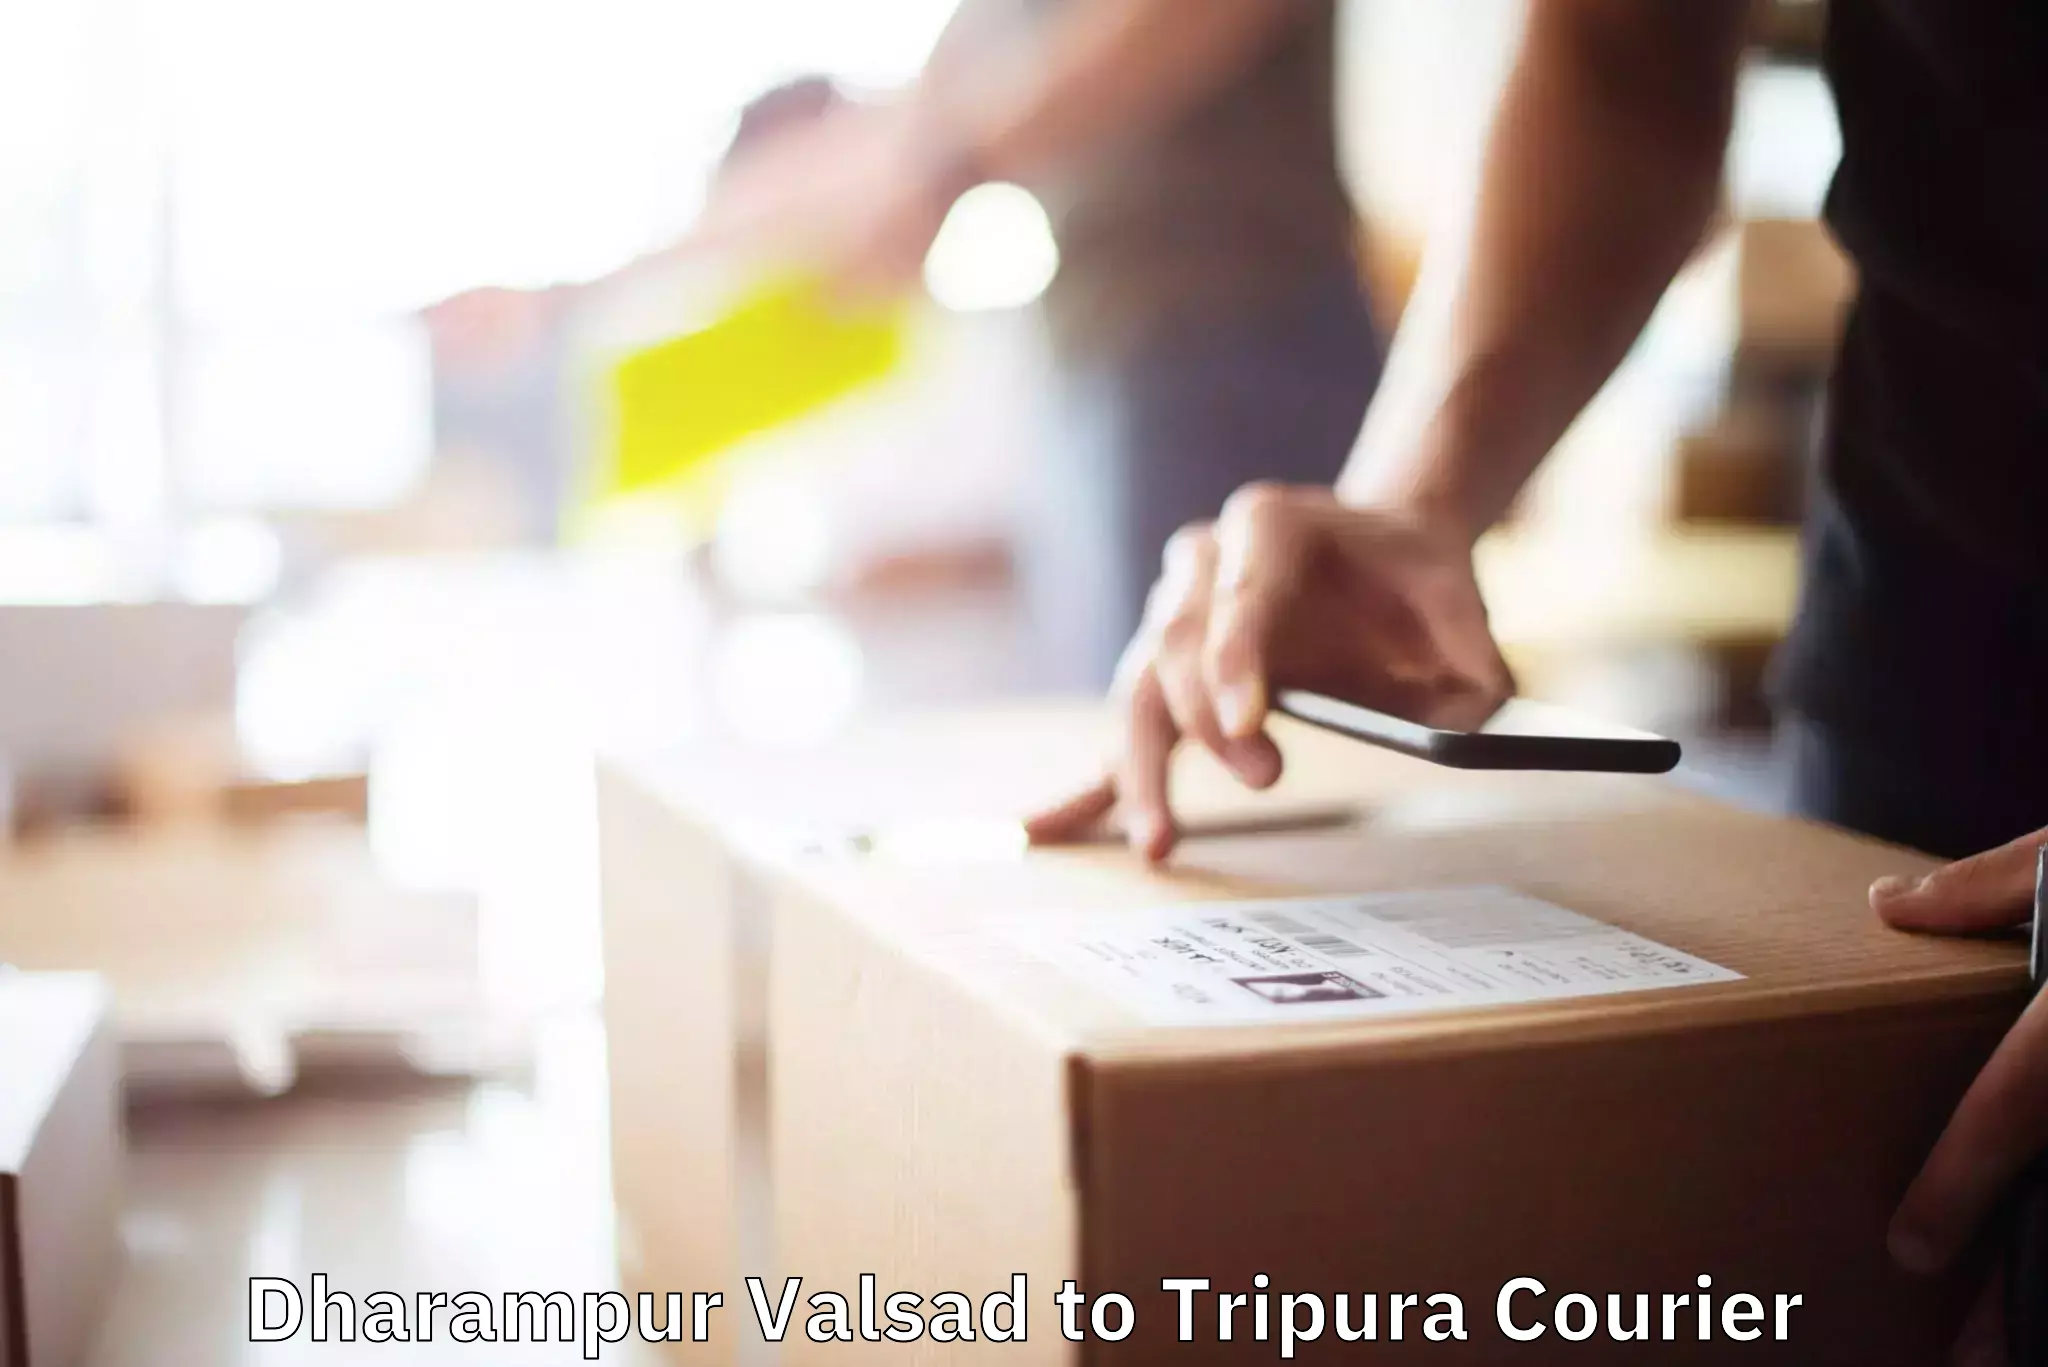 Budget-friendly moving services in Dharampur Valsad to Sonamura